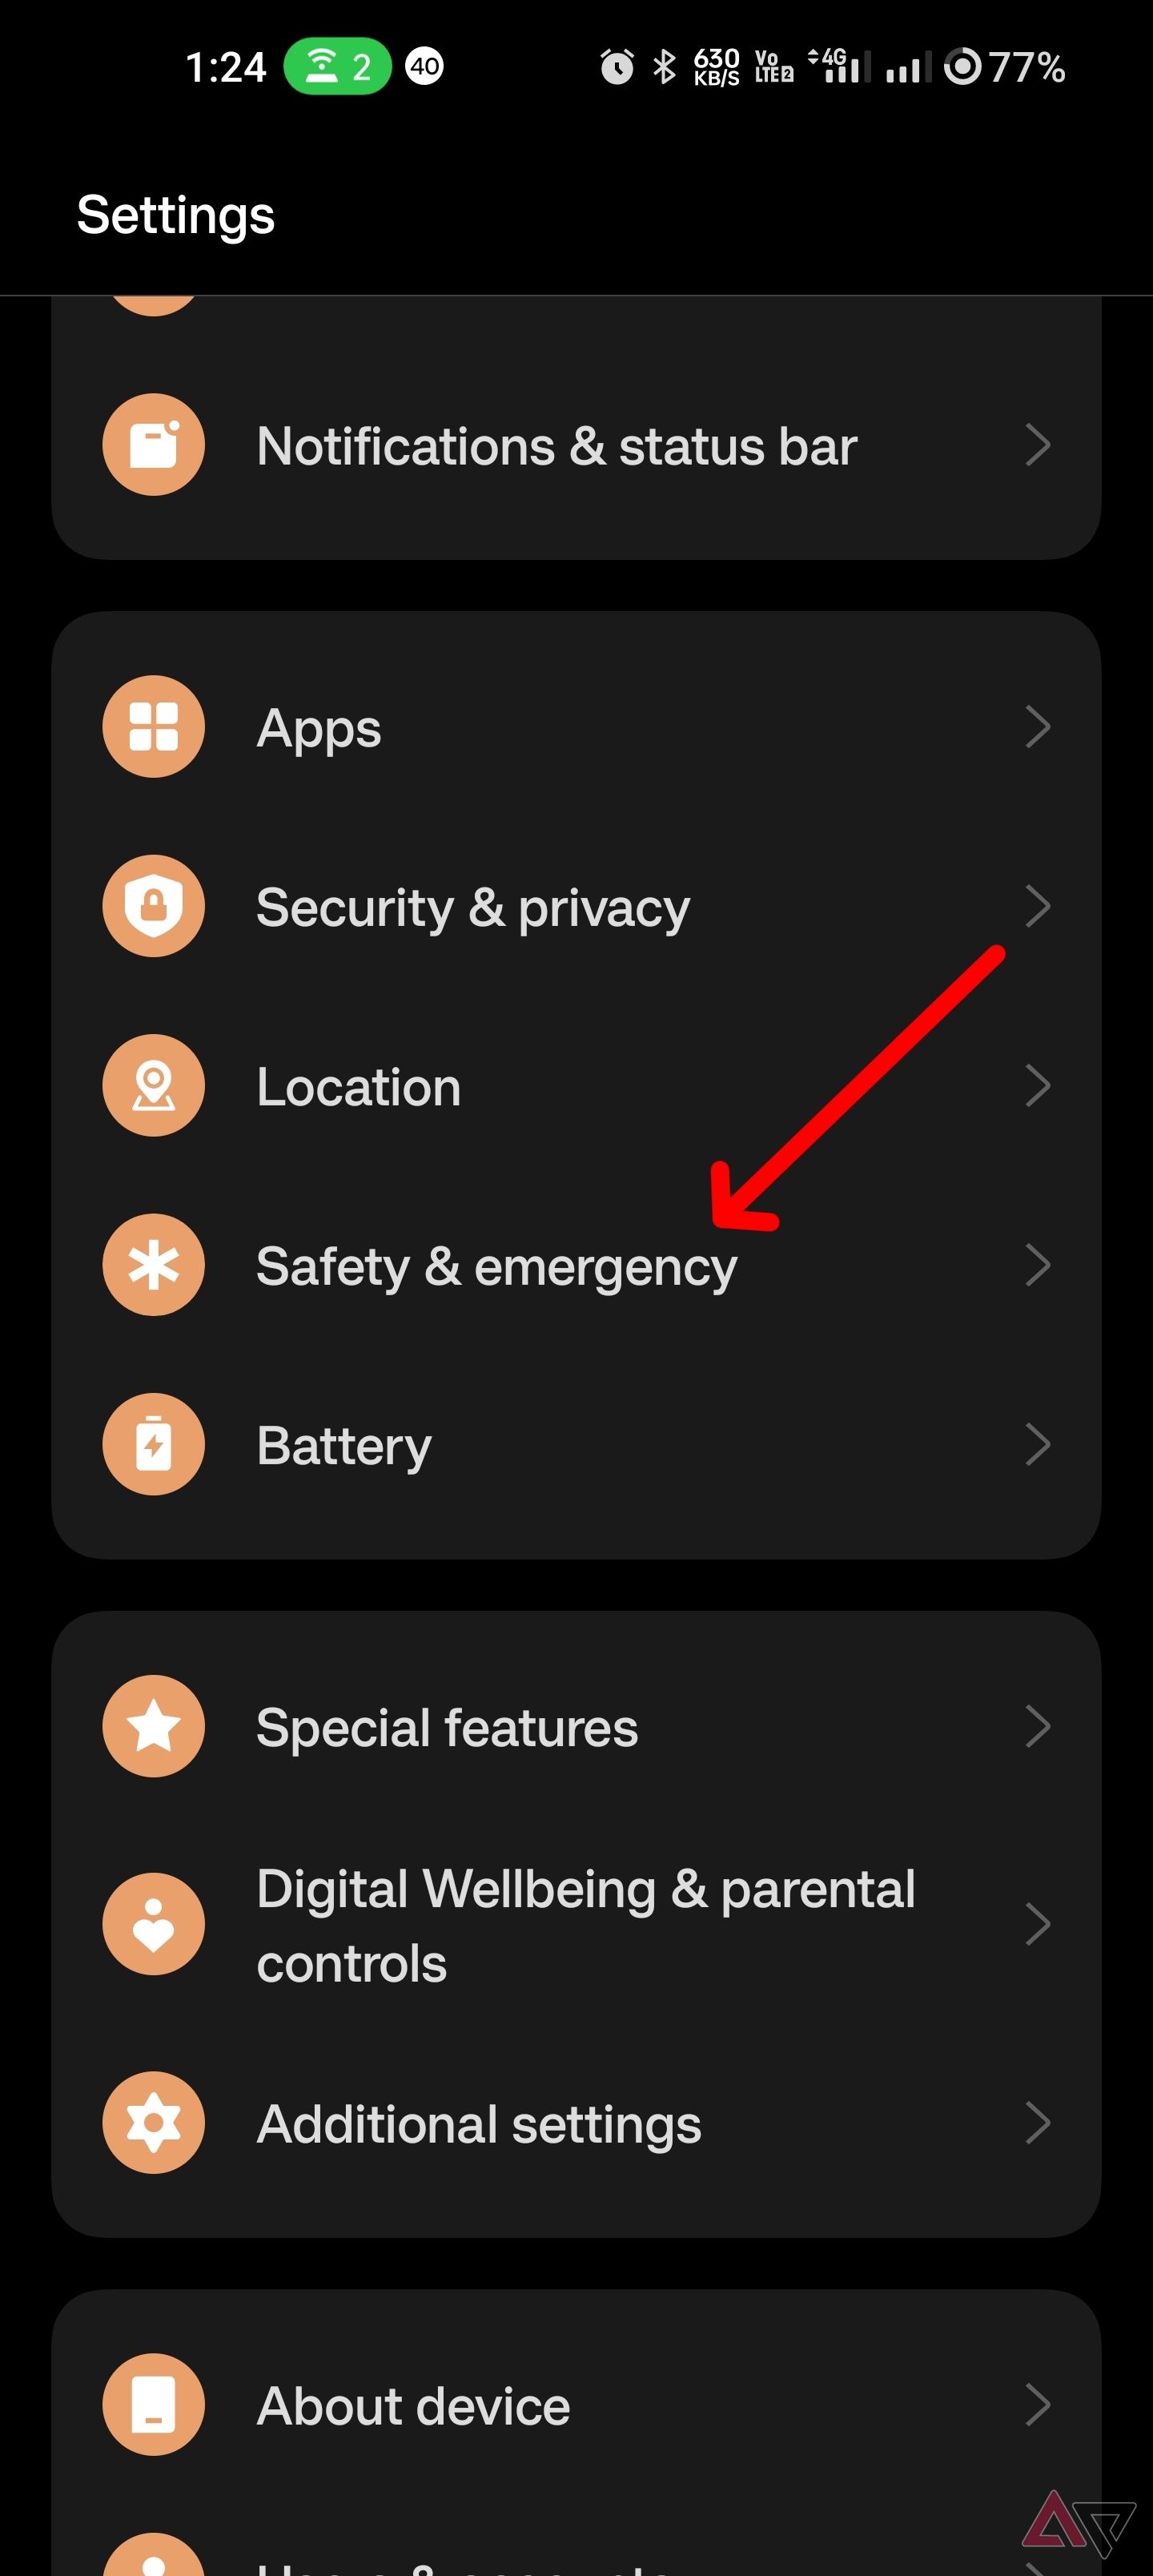 Locate Safety and Emergency from the settings menu.